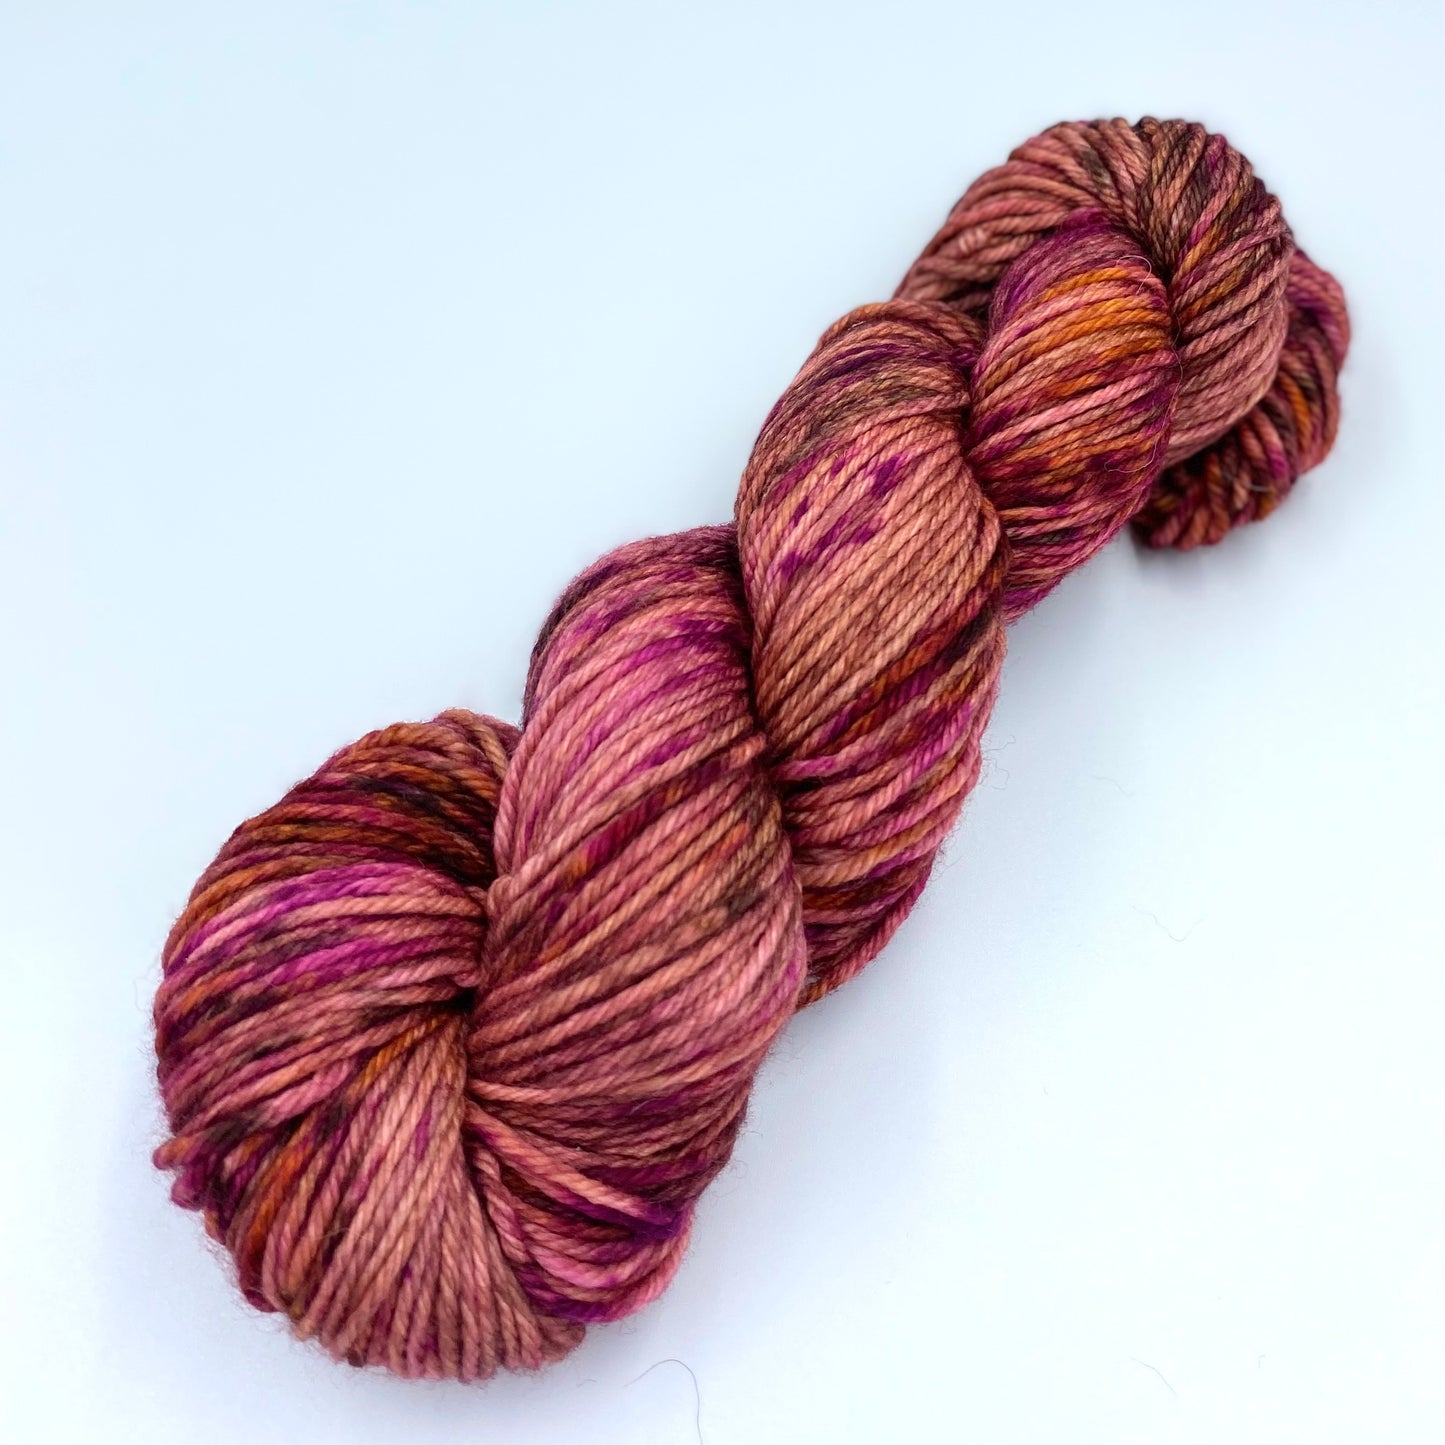 Skein of superwash merino yarn hand dyed in a mix of brown, golden, and fuschia color